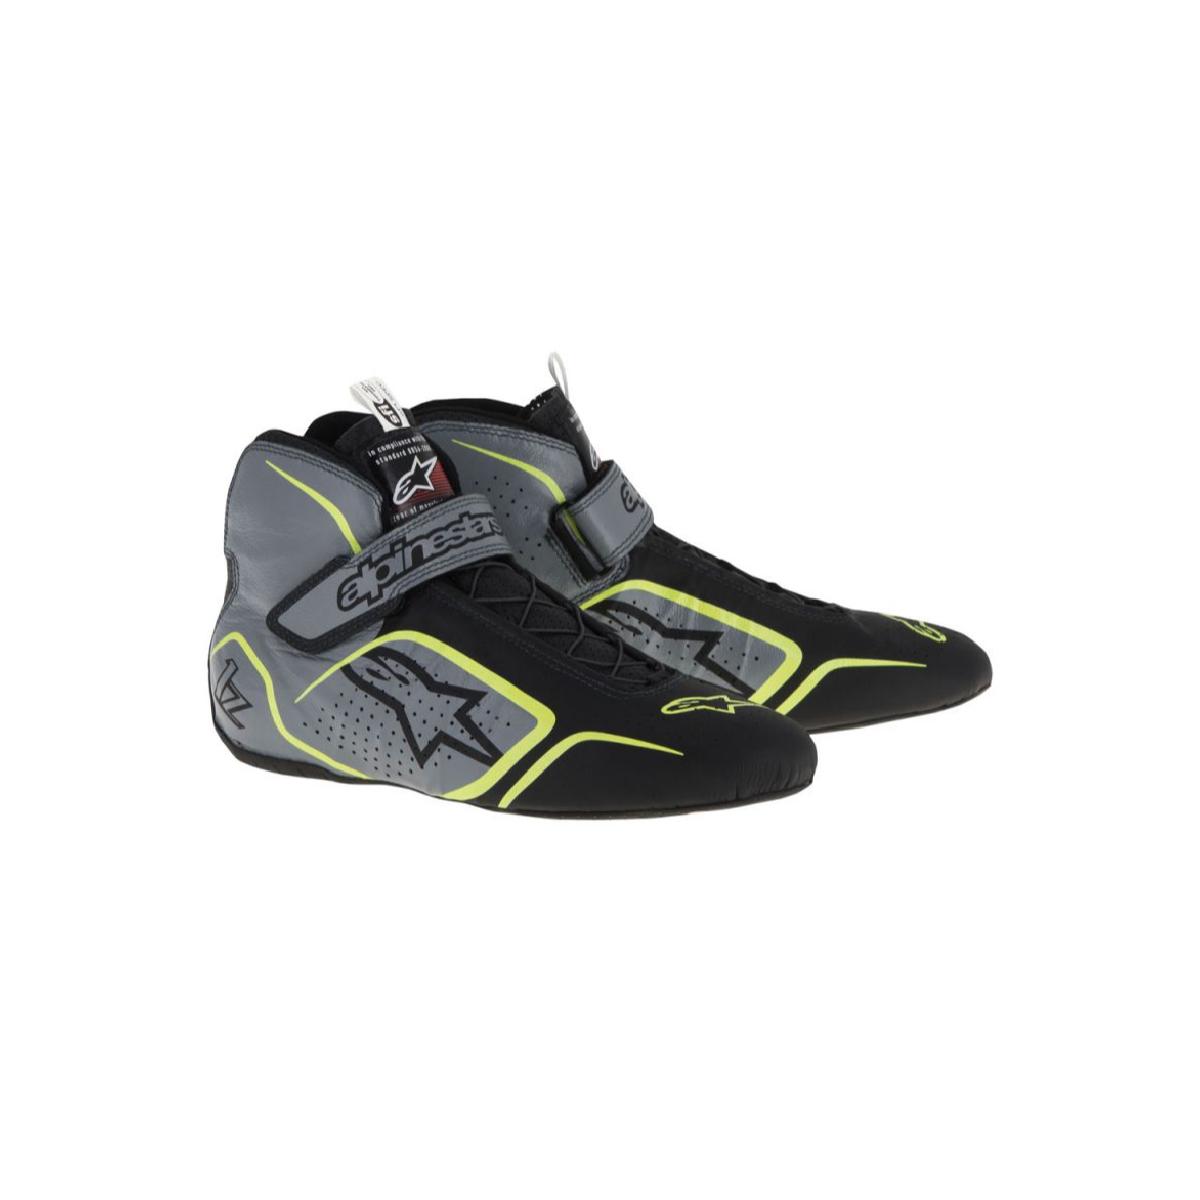 Black/Yellow, Size 13 Alpinestars Mens Race Driving Shoes and Boot